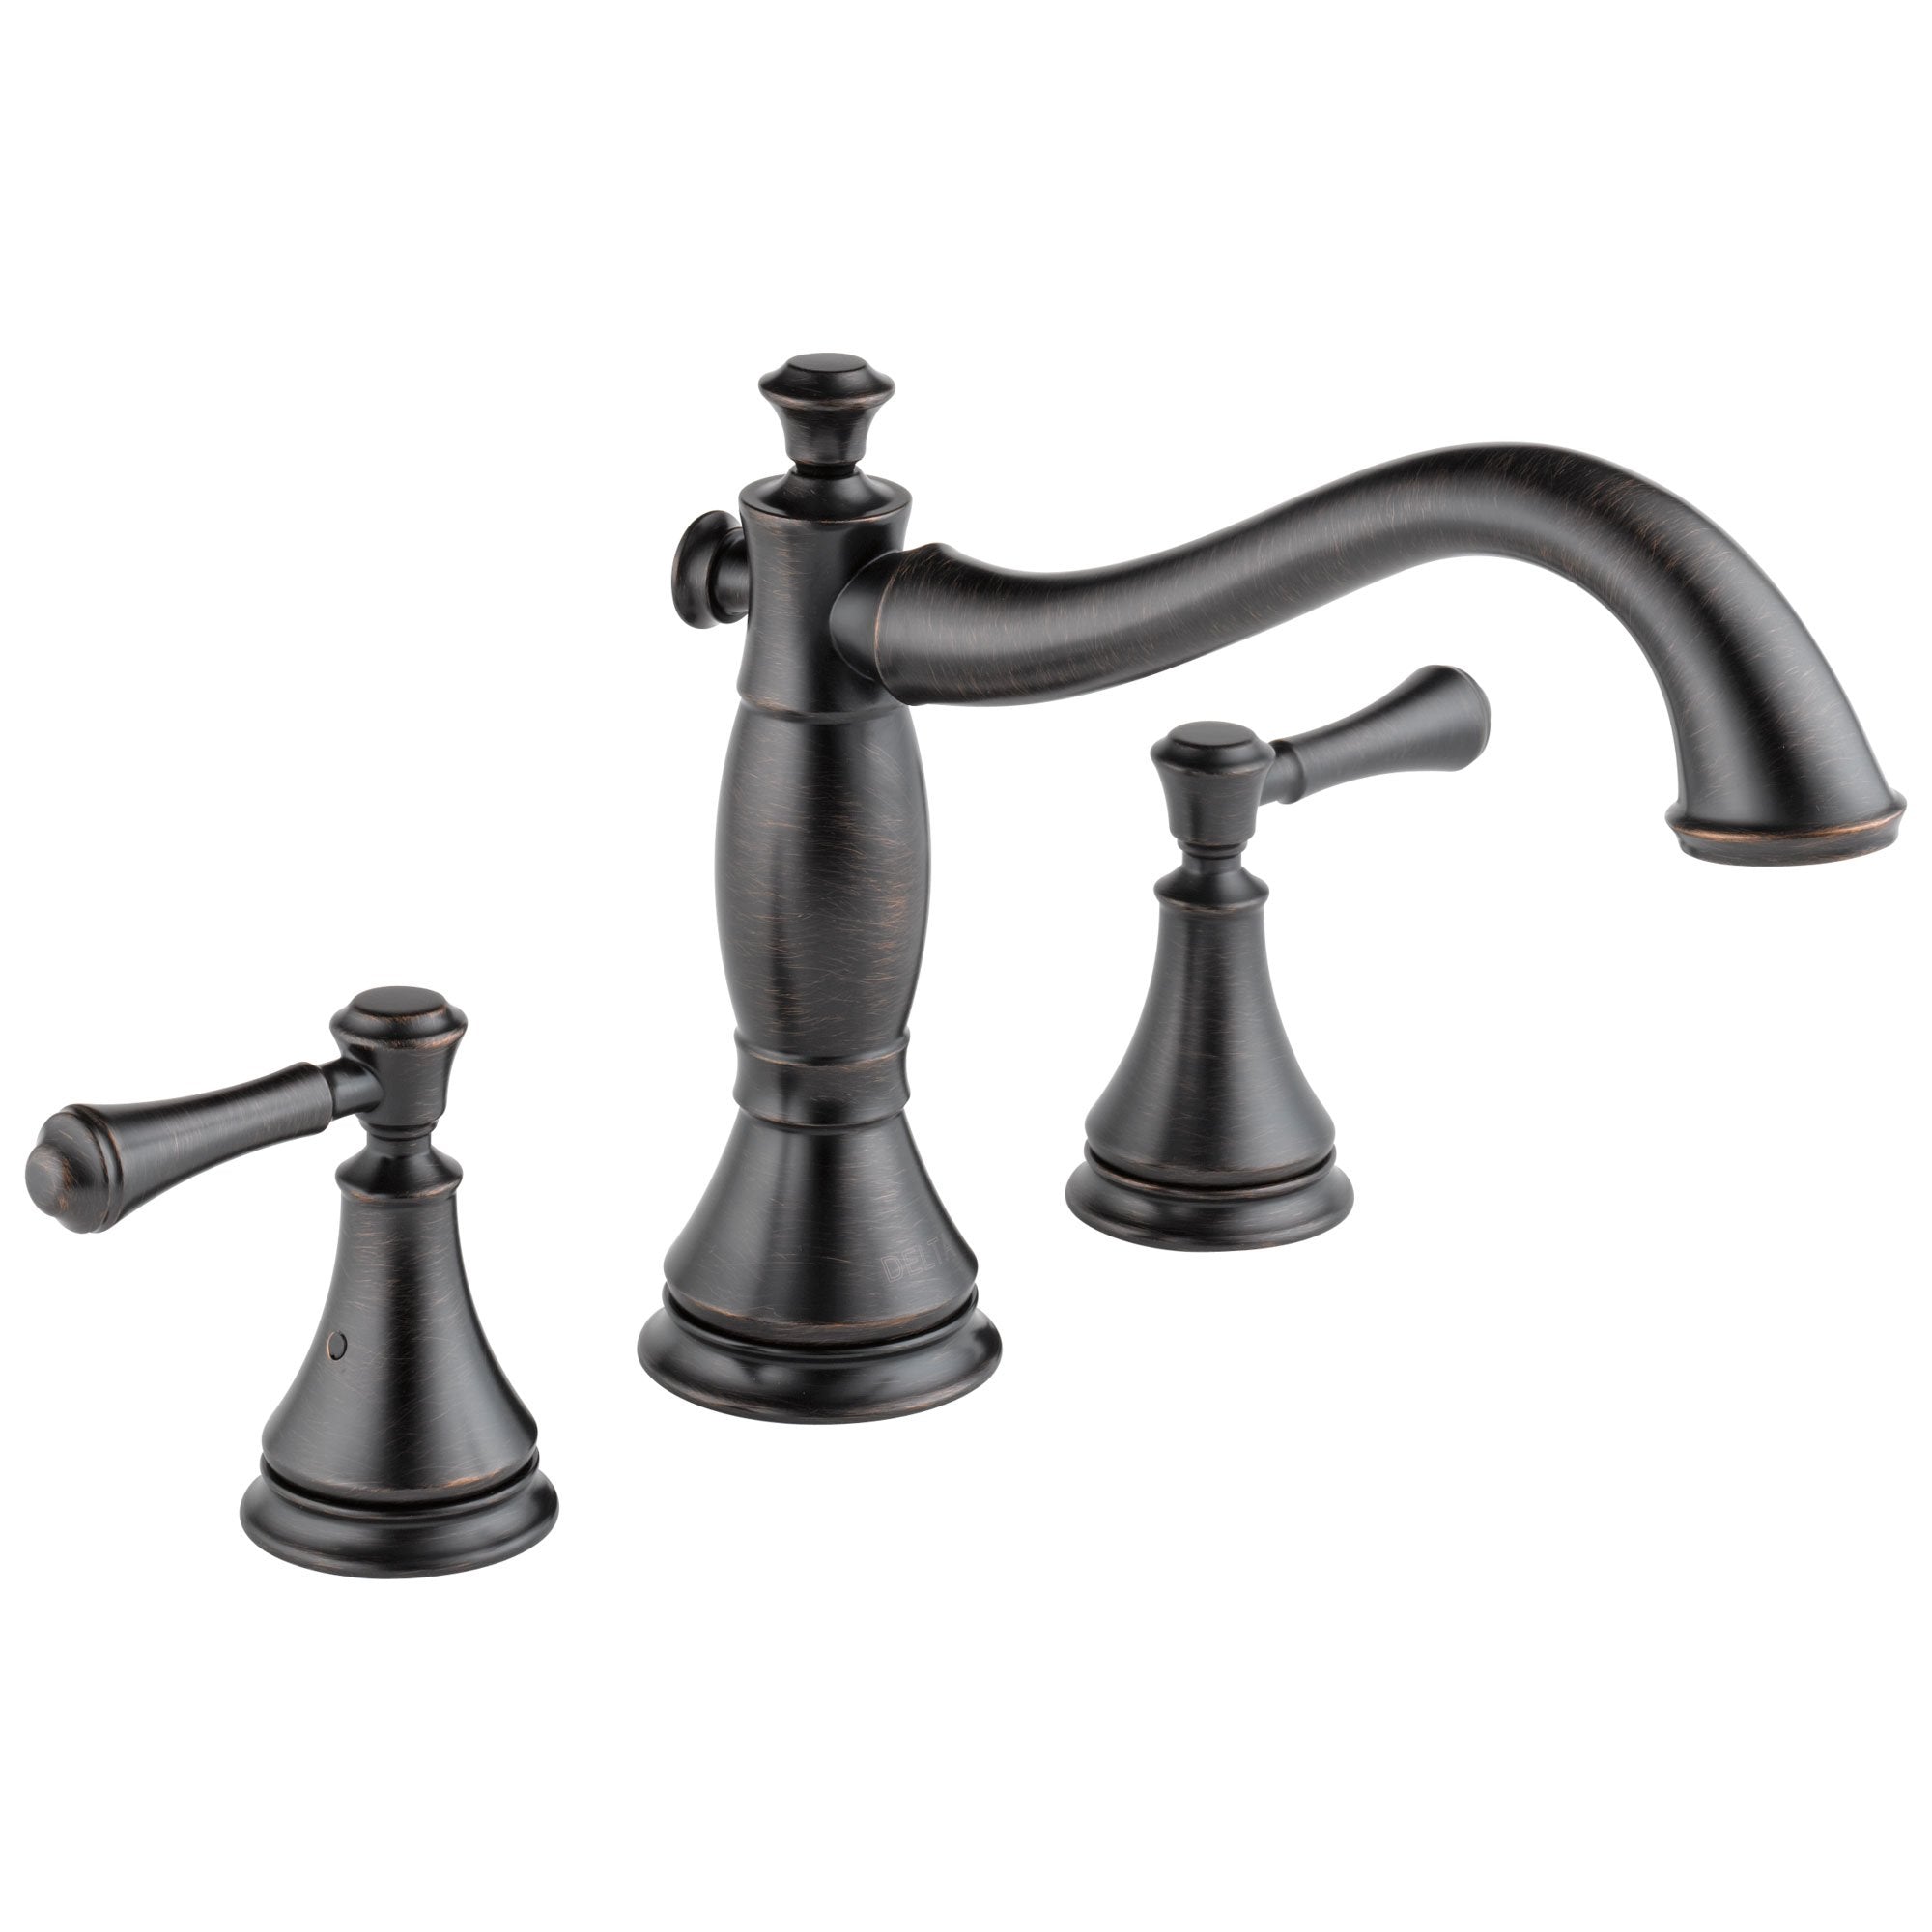 Delta Cassidy Collection Venetian Bronze Finish Roman Tub Filler Faucet COMPLETE ITEM Includes (2) Lever Handles and Rough-in Valve D1431V